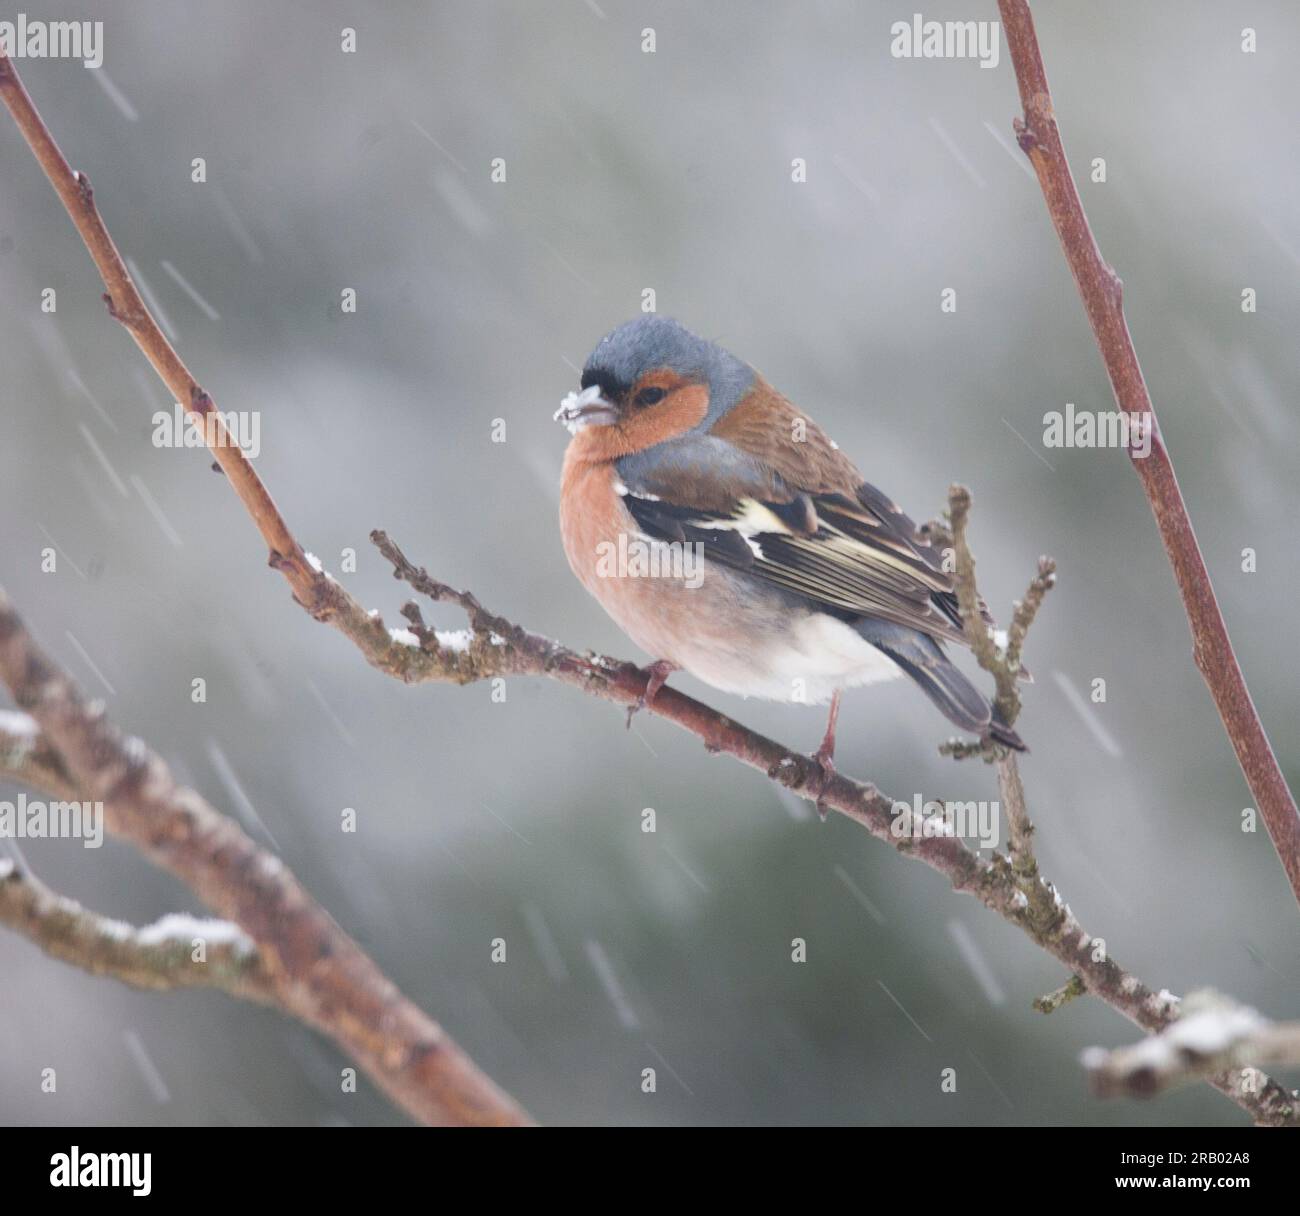 COMMON CHAFFINCH on branch at winter Stock Photo